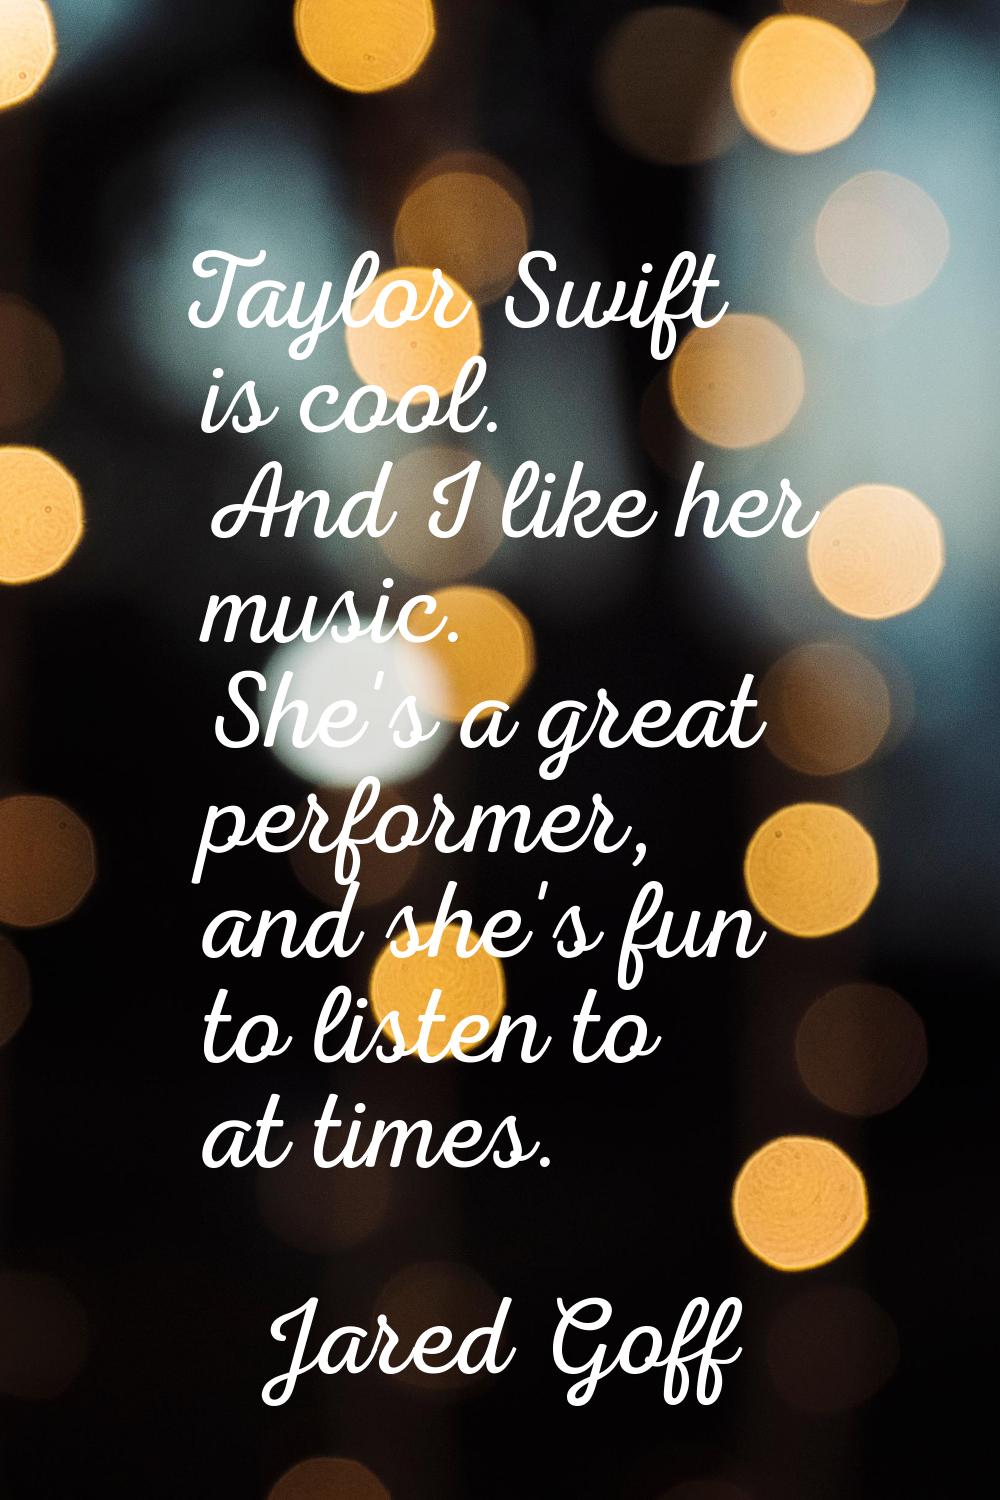 Taylor Swift is cool. And I like her music. She's a great performer, and she's fun to listen to at 